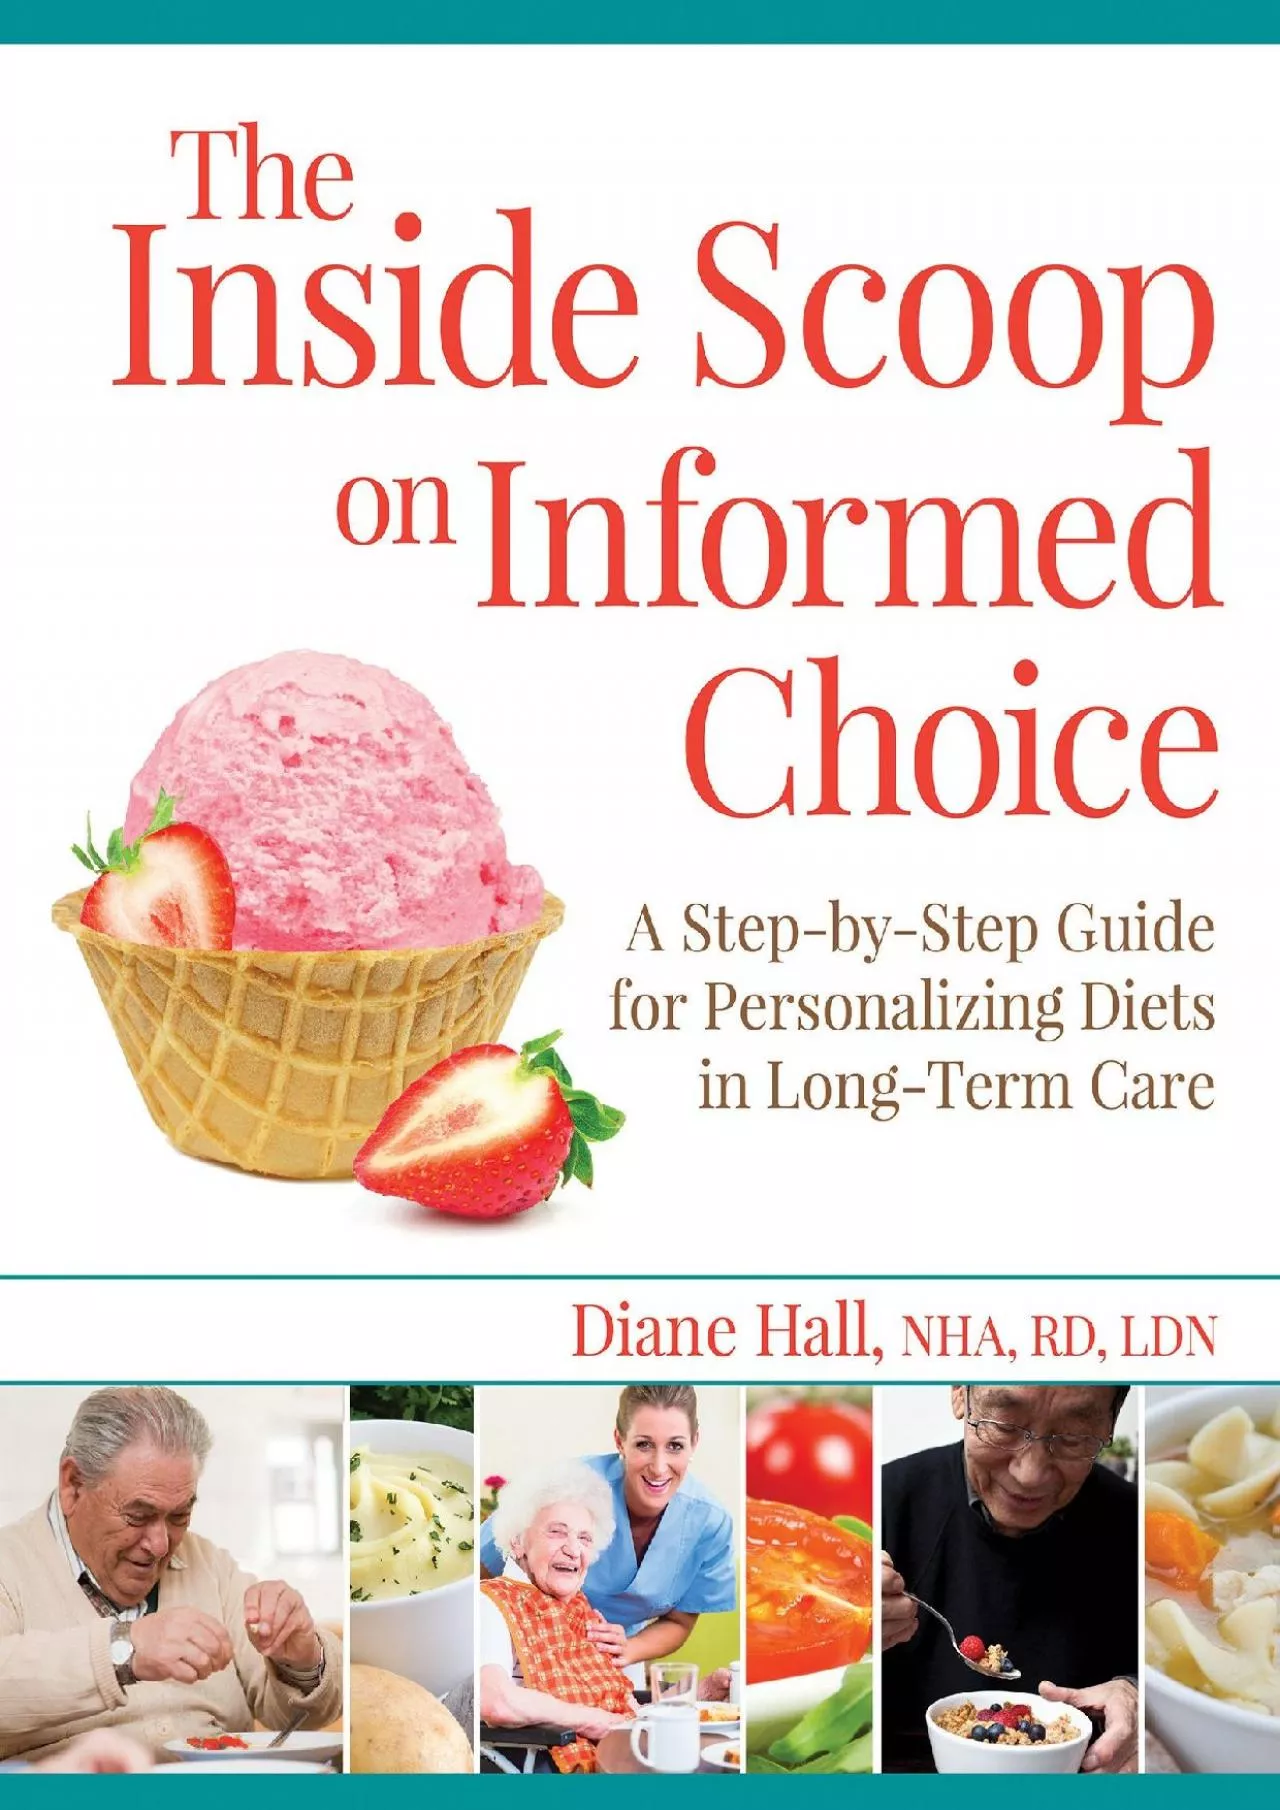 (BOOK)-The Inside Scoop on Informed Choice: A Step-by-Step Guide for Personalizing Diets